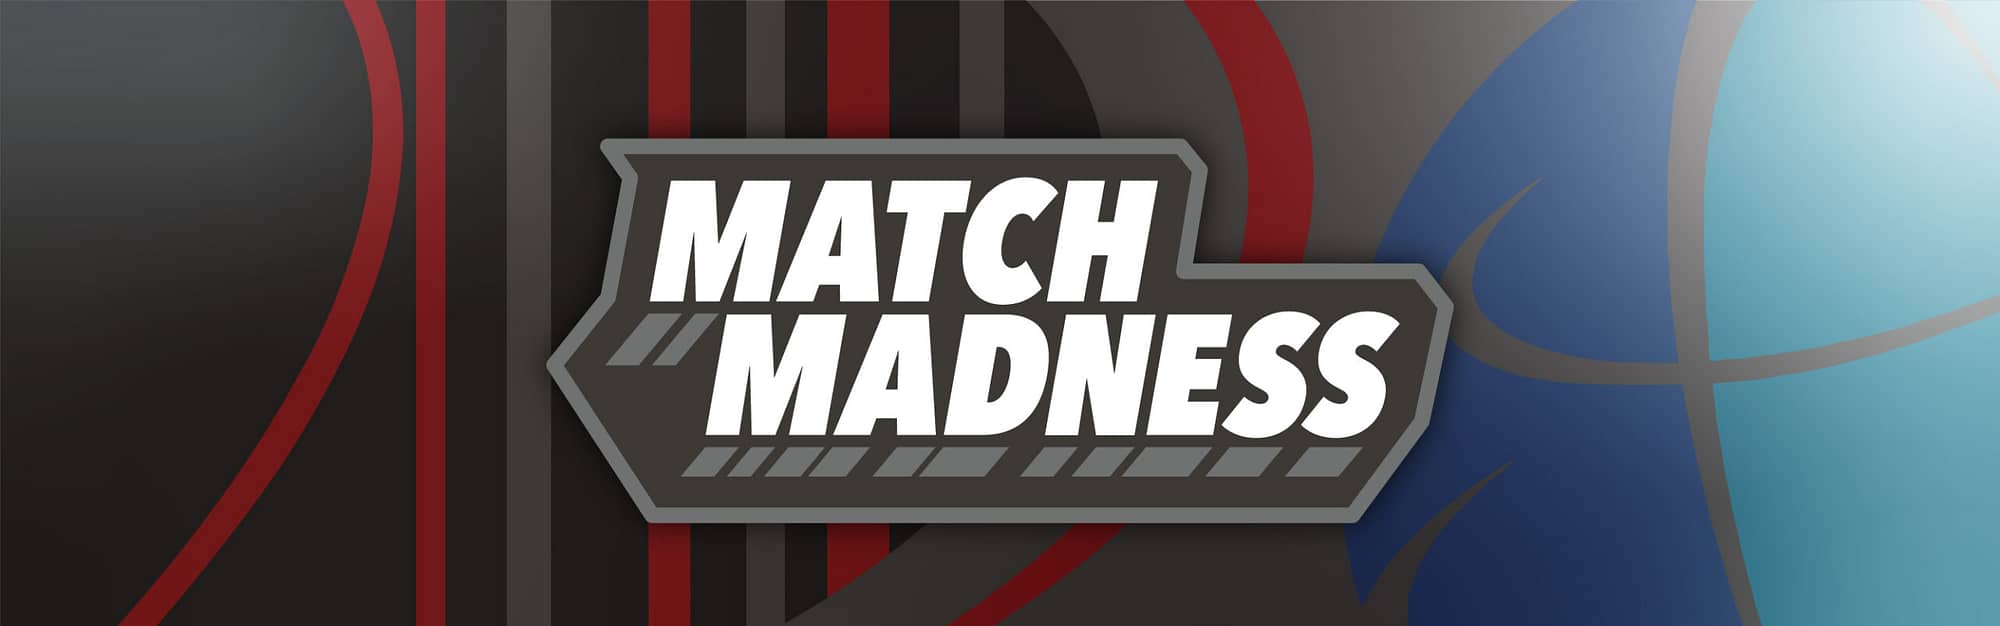 Co-branded Match Madness image for the collaboration between Millennium and Widelity to talk about broadband funding match